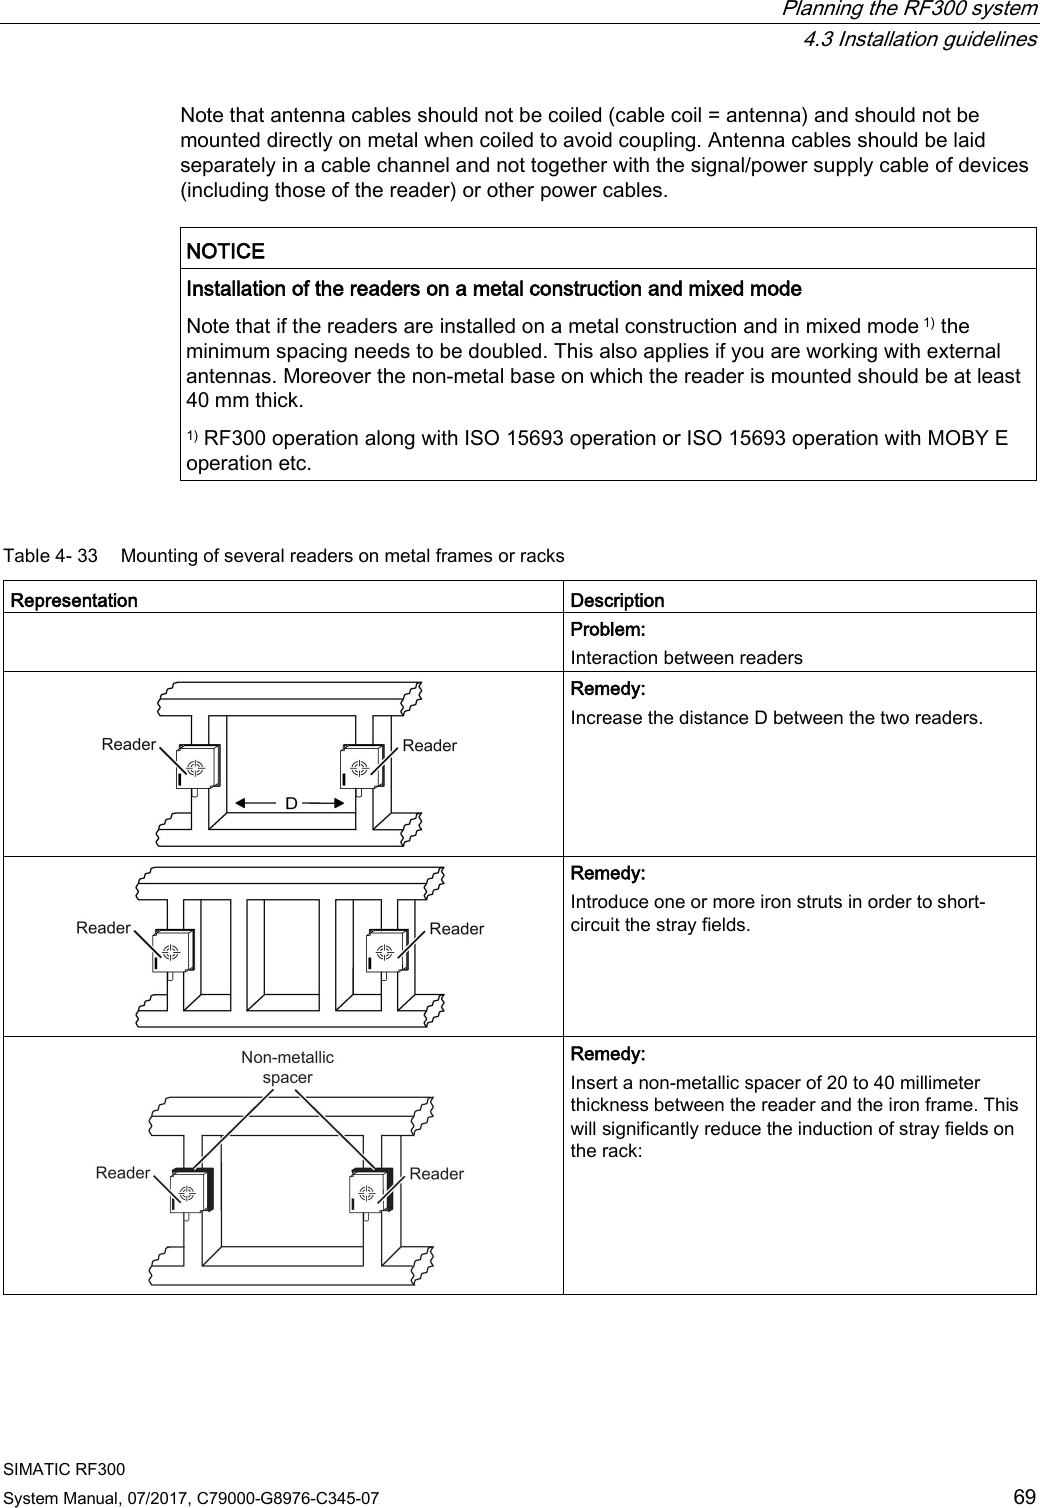  Planning the RF300 system  4.3 Installation guidelines SIMATIC RF300 System Manual, 07/2017, C79000-G8976-C345-07 69 Note that antenna cables should not be coiled (cable coil = antenna) and should not be mounted directly on metal when coiled to avoid coupling. Antenna cables should be laid separately in a cable channel and not together with the signal/power supply cable of devices (including those of the reader) or other power cables.   NOTICE Installation of the readers on a metal construction and mixed mode Note that if the readers are installed on a metal construction and in mixed mode 1) the minimum spacing needs to be doubled. This also applies if you are working with external antennas. Moreover the non-metal base on which the reader is mounted should be at least 40 mm thick.  1) RF300 operation along with ISO 15693 operation or ISO 15693 operation with MOBY E operation etc.  Table 4- 33 Mounting of several readers on metal frames or racks Representation Description  Problem: Interaction between readers  Remedy: Increase the distance D between the two readers.  Remedy: Introduce one or more iron struts in order to short-circuit the stray fields.  Remedy: Insert a non-metallic spacer of 20 to 40 millimeter thickness between the reader and the iron frame. This will significantly reduce the induction of stray fields on the rack:  